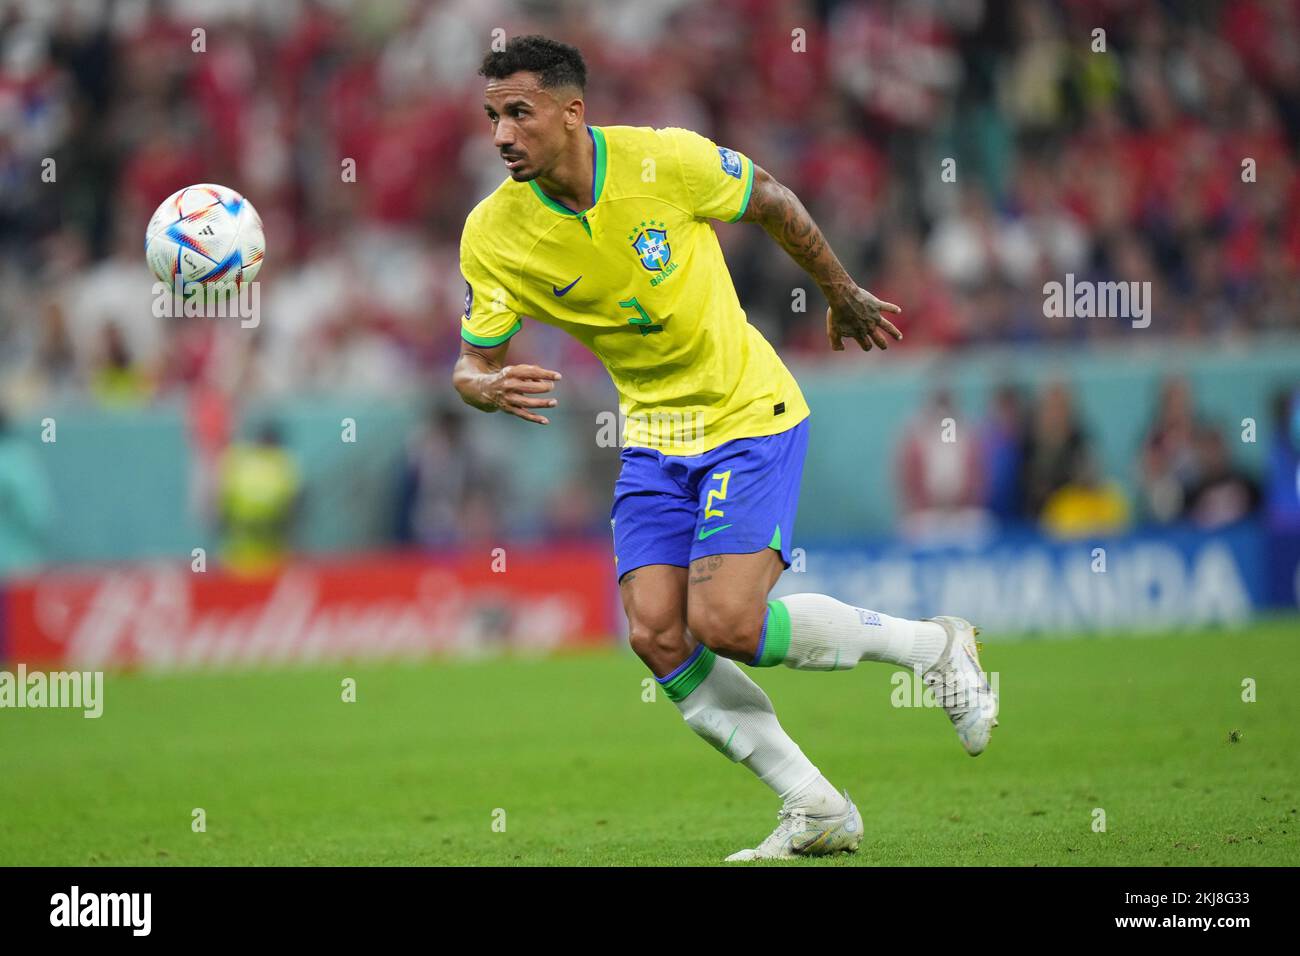 Danilo Da Silva of Brazil during the FIFA World Cup Qatar 2022 match, Group G, between Brazil and Serbia played at Lusail Stadium on Nov 24, 2022 in Lusail, Qatar. (Photo by Bagu Blanco / PRESSIN) Credit: PRESSINPHOTO SPORTS AGENCY/Alamy Live News Stock Photo